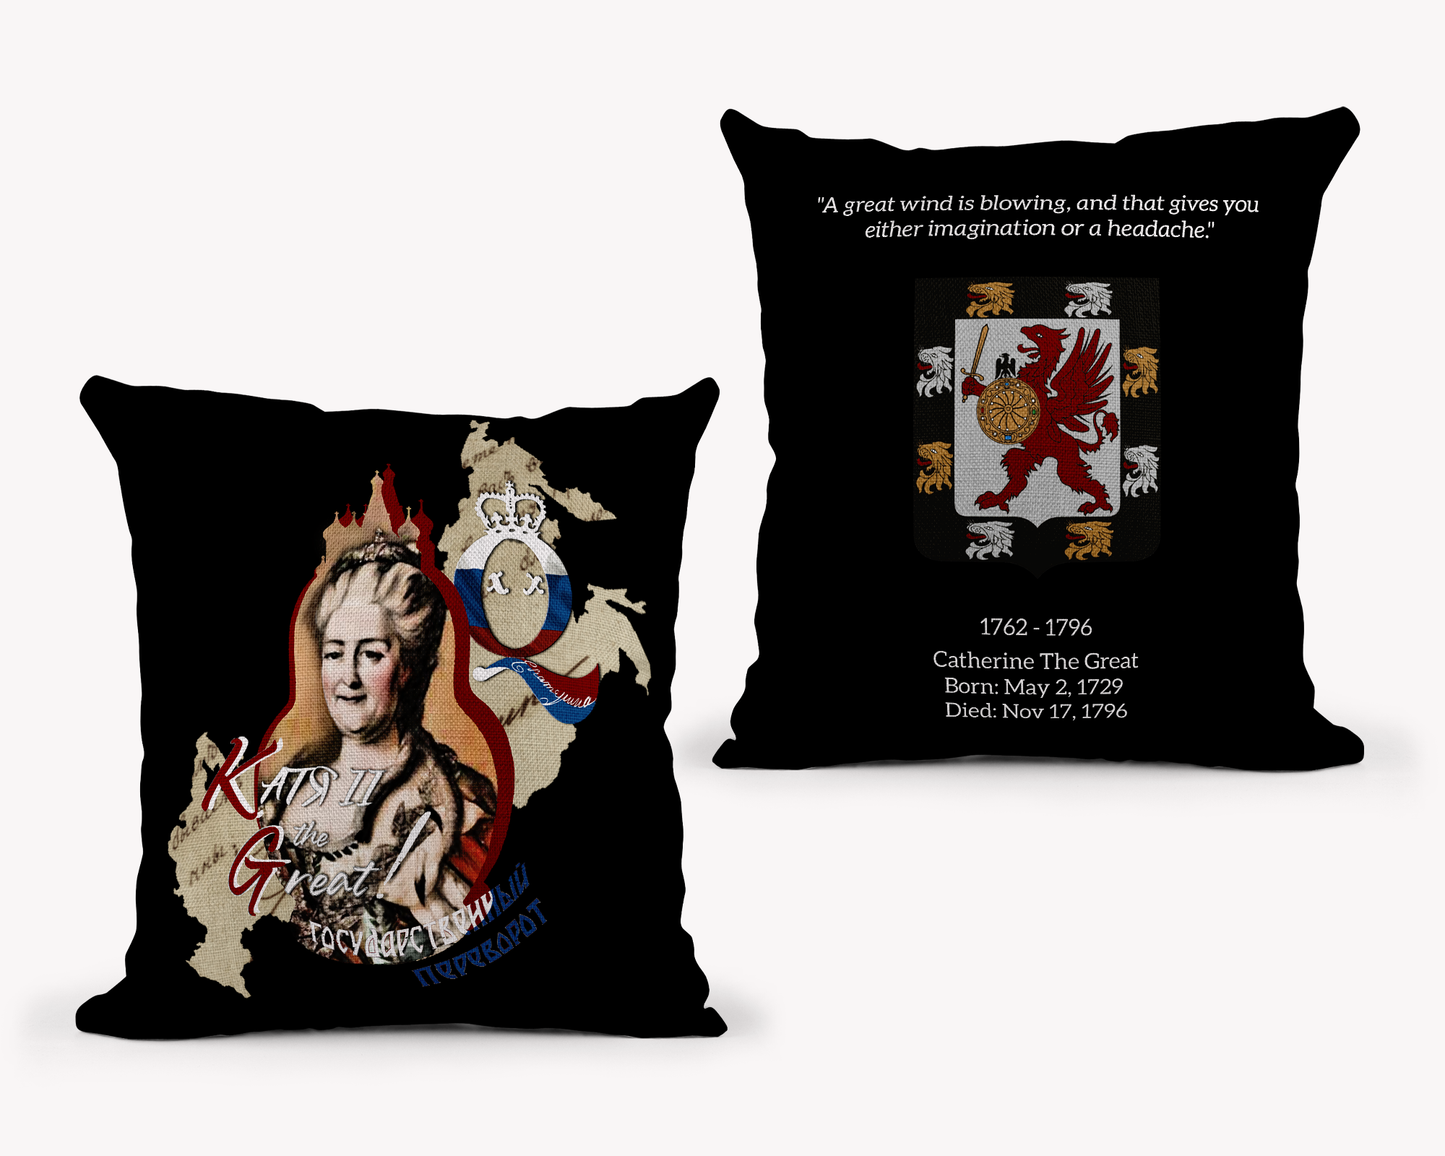 Catherine The Great Pillow Cover - Black - 22x22